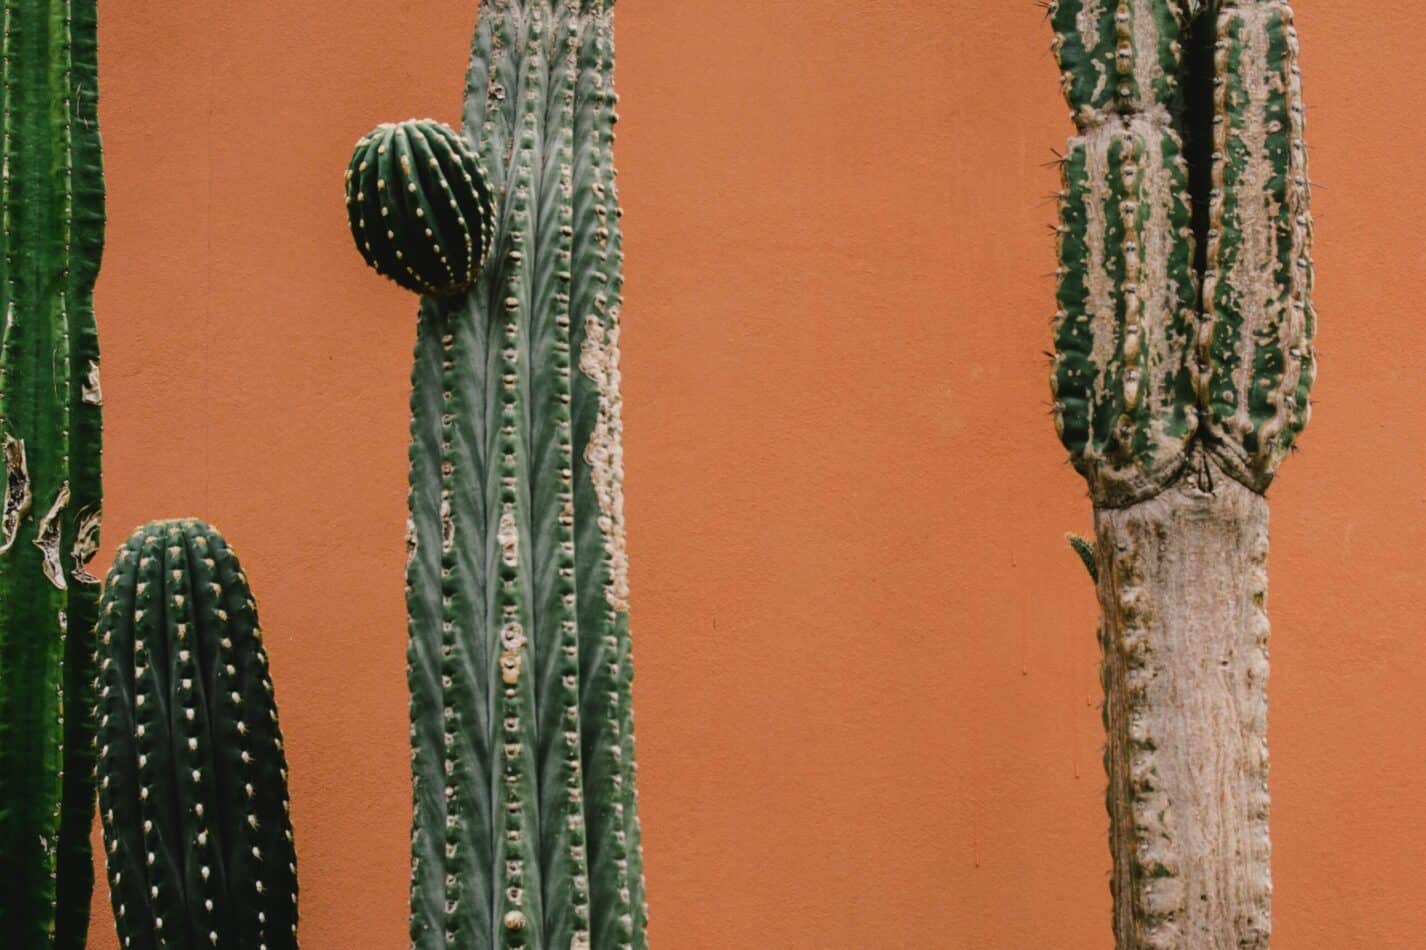 Cactus Meaning And Symbolism - My Life in Blossom